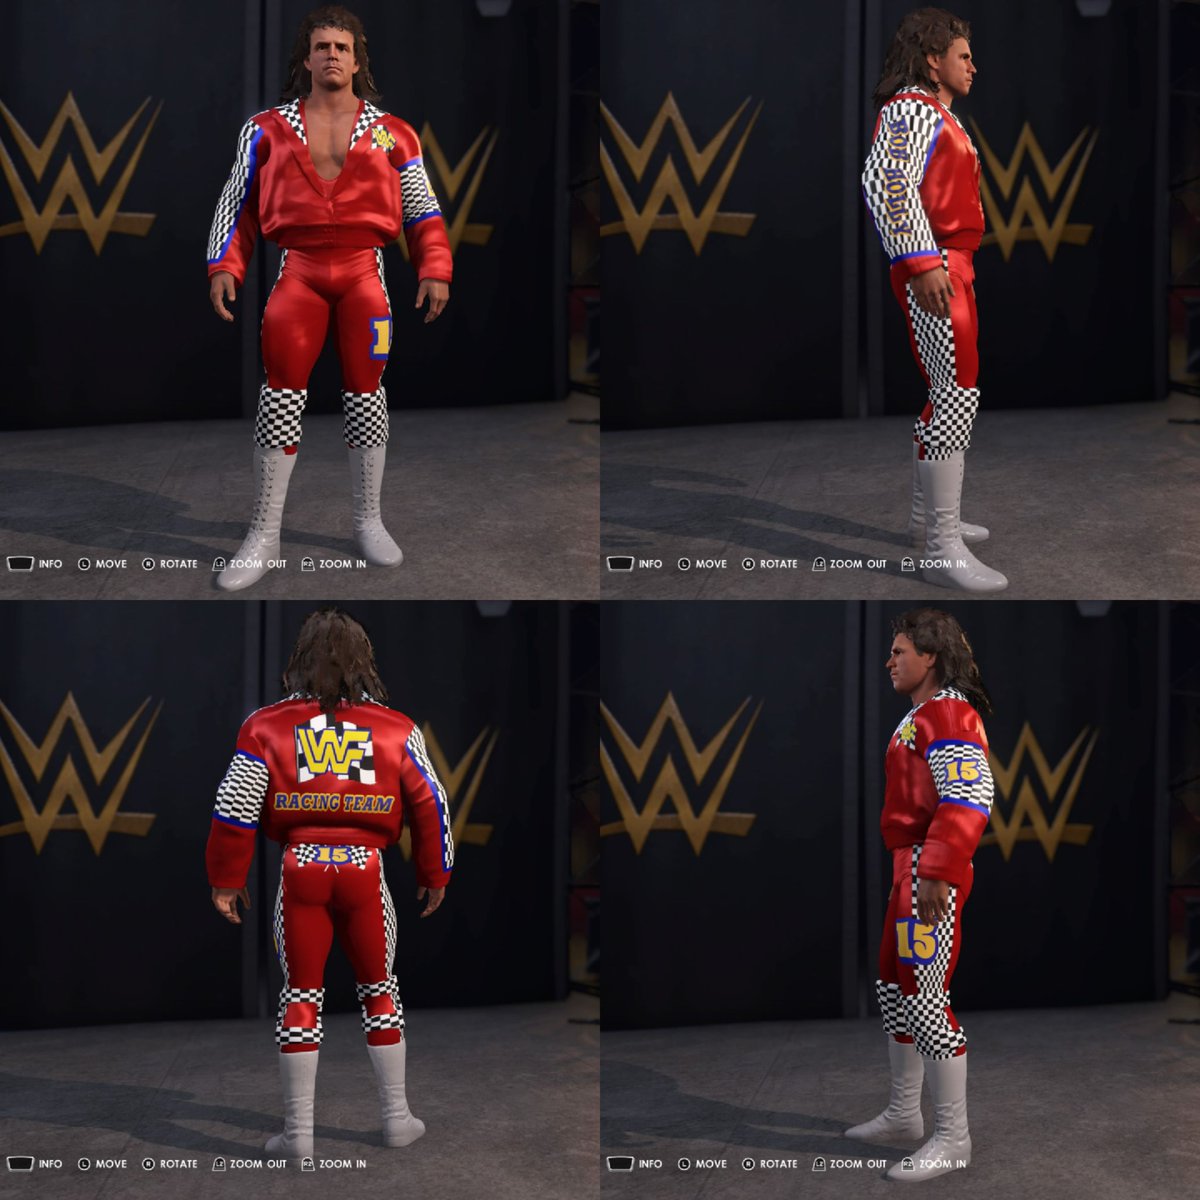 Bob Sparkplug Holly is now available on CC. 
Moveset by: @SkyMovesets
Logos by: @LazCreates2k & @Dre41Gaming 
Search Tags: 
BobHolly
EncyCAWpedia 
ShawnStylz
@WWEgames @ElementGamesTV @Smacktalks 
@EncyCAWpedia